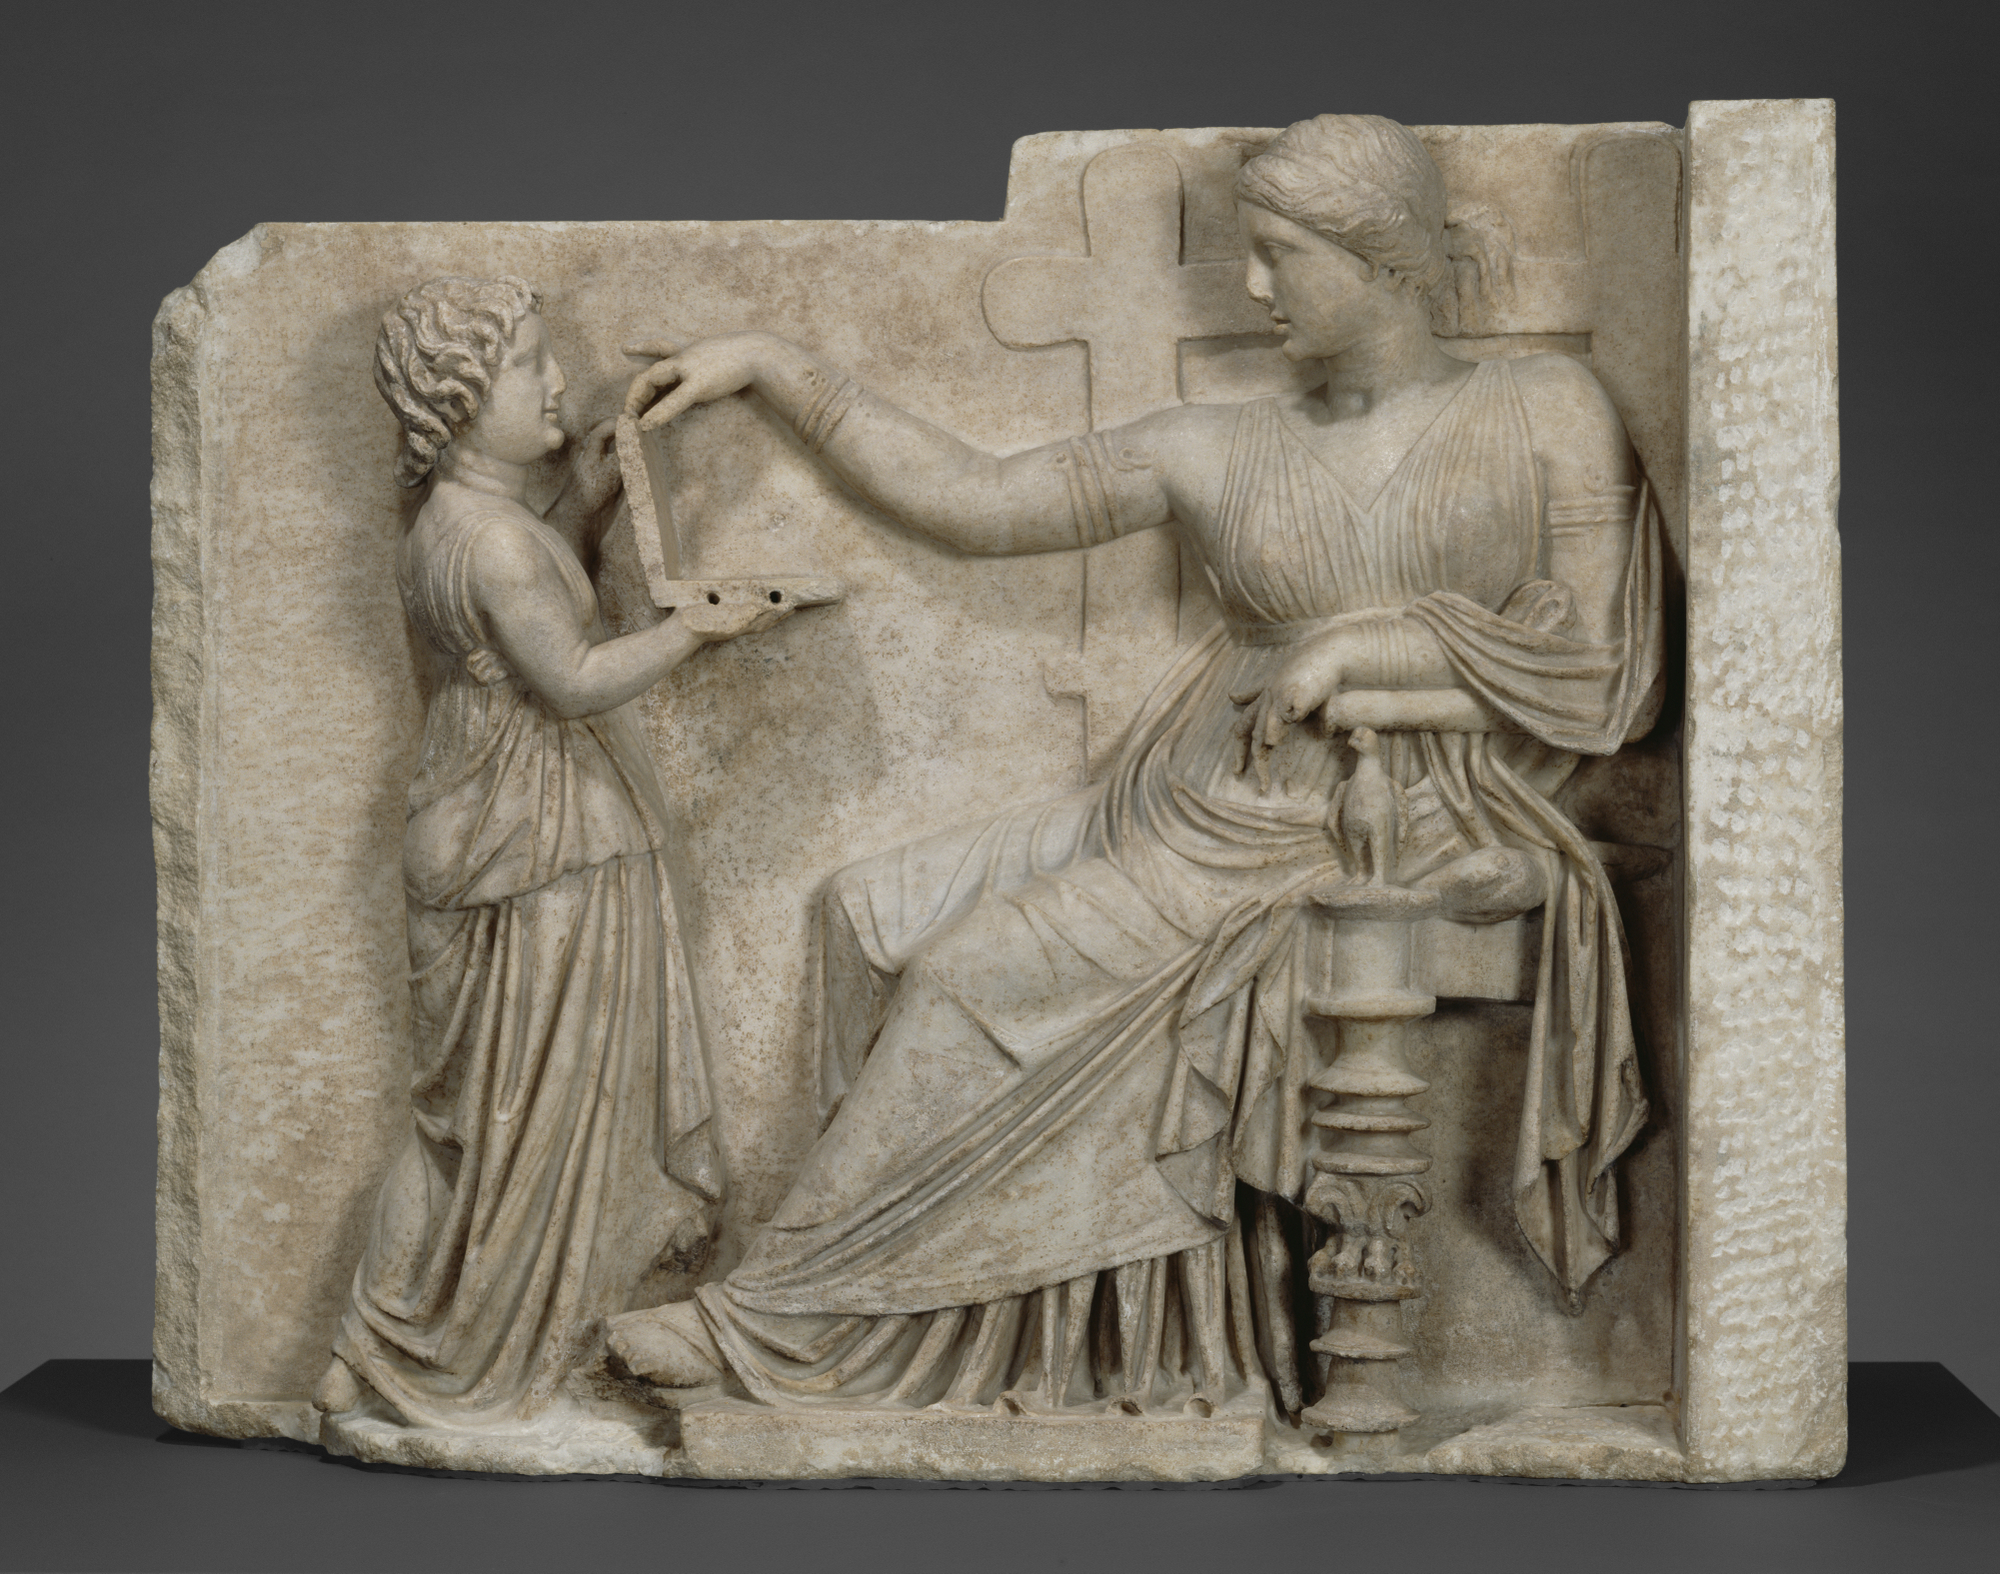 Gravestone with a Woman and Her Attendant; Unknown; (Delos?), East Greece; about 100 B.C.; Marble; 94.6 x 120.7 x 21.6 cm (37 1/4 x 47 1/2 x 8 1/2 in.); 72.AA.159